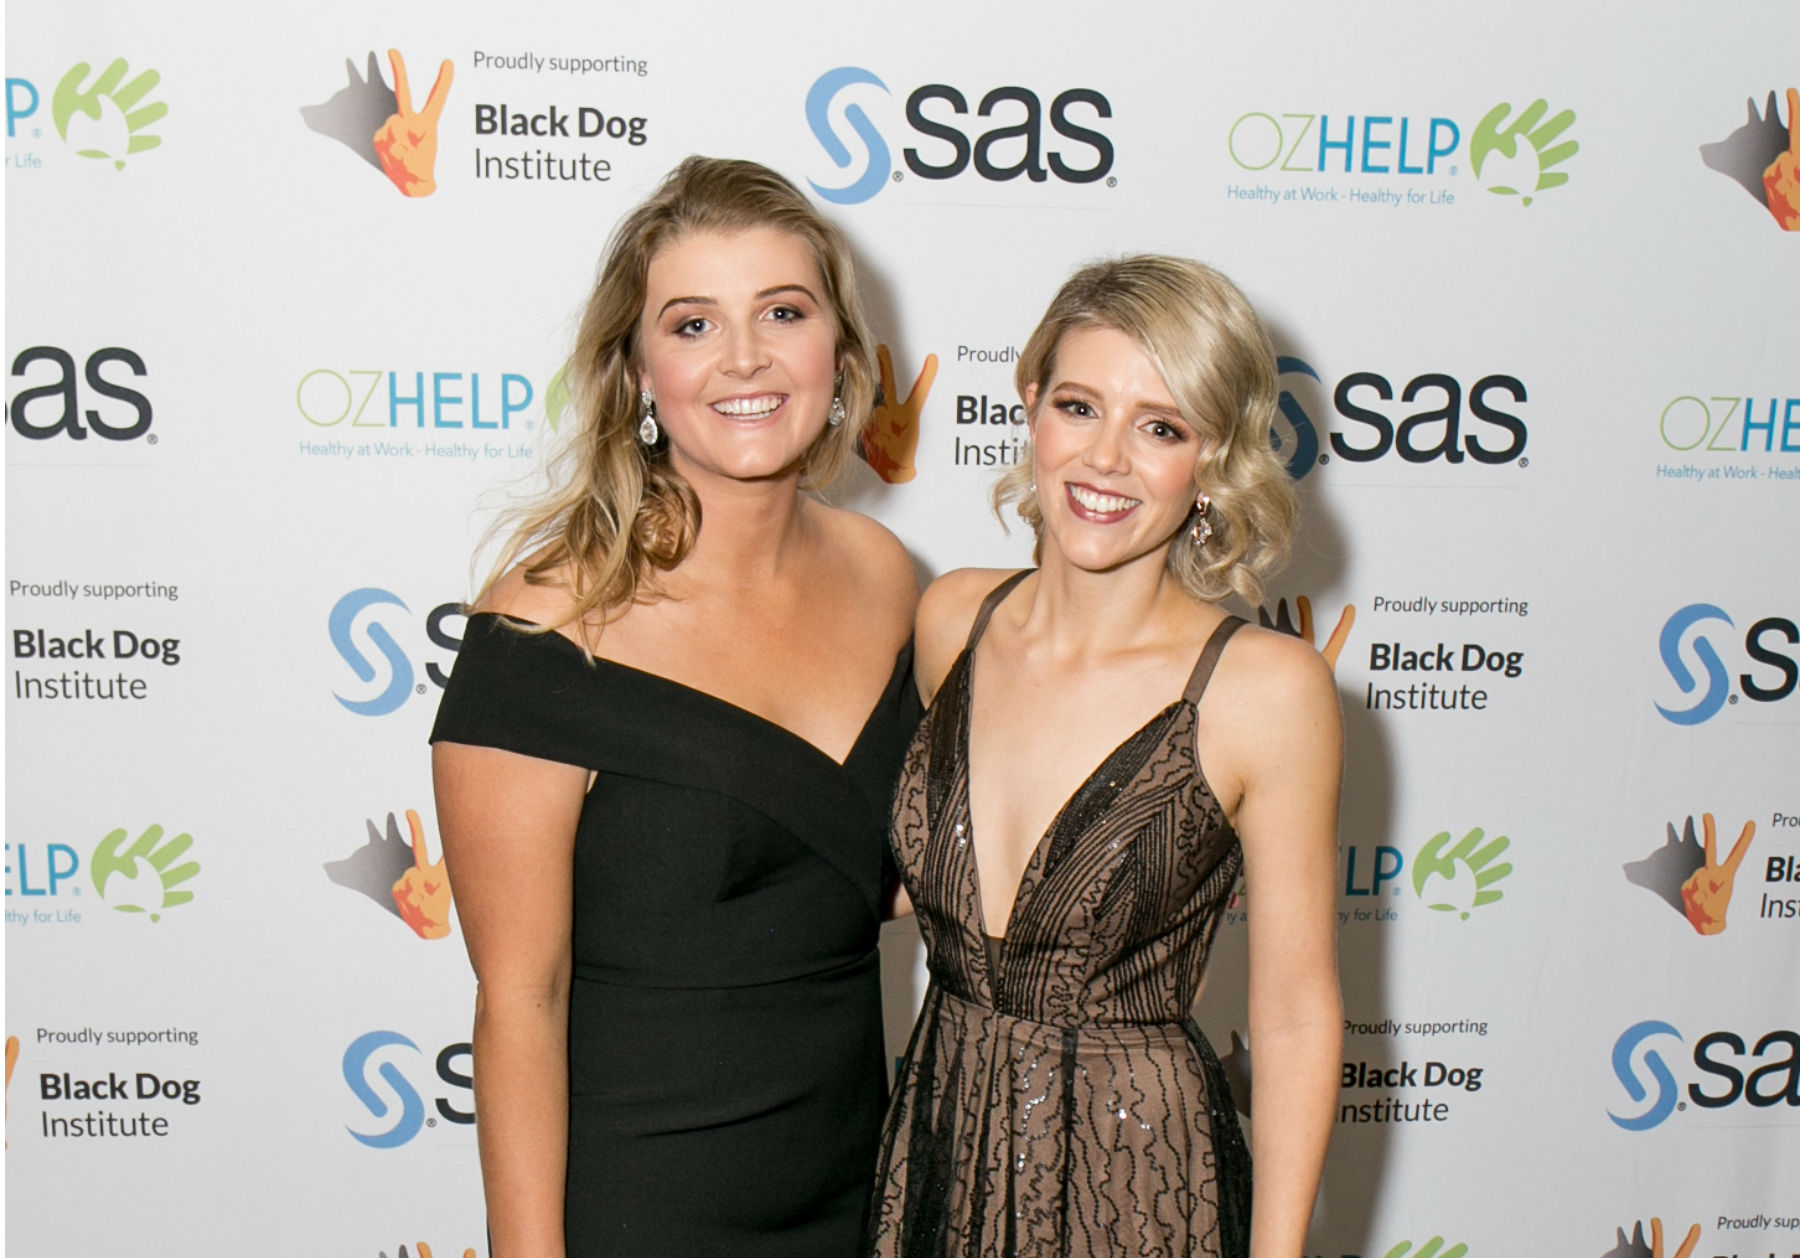 Britt Shephard and Shannon Narracott in front of sponsors logos at the Suicide Awareness Ball, smiling at camera